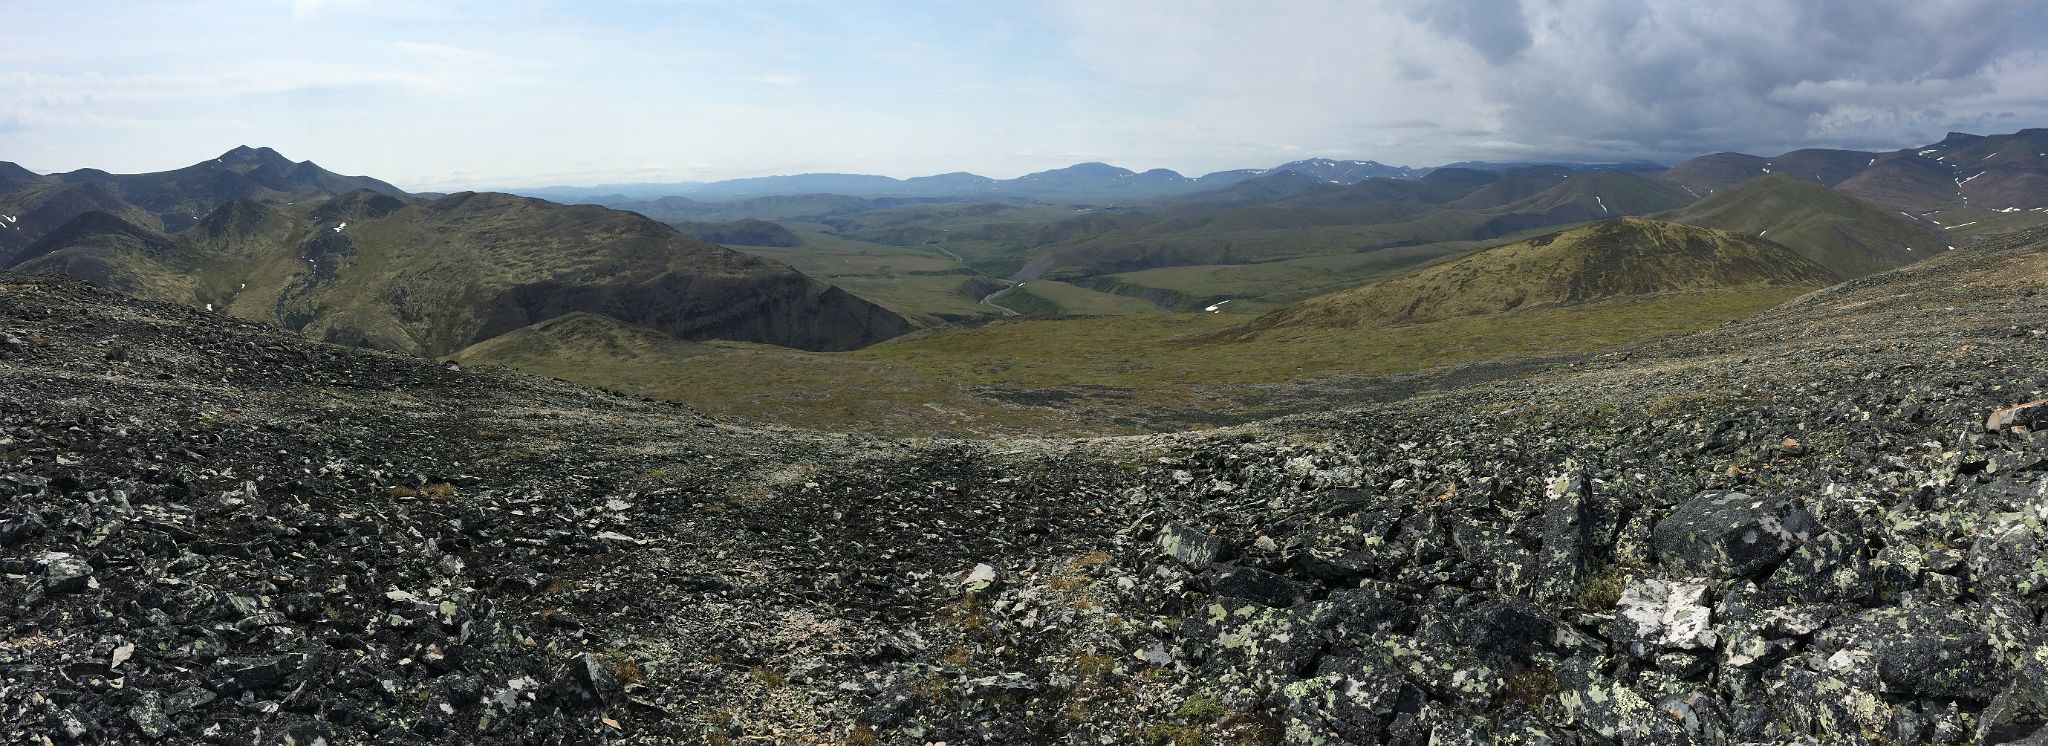 14D Panoramic View Of Richardson Mountains From Communication Tower Near The Dempster Highway On Day Tour From Inuvik To Arctic Circle